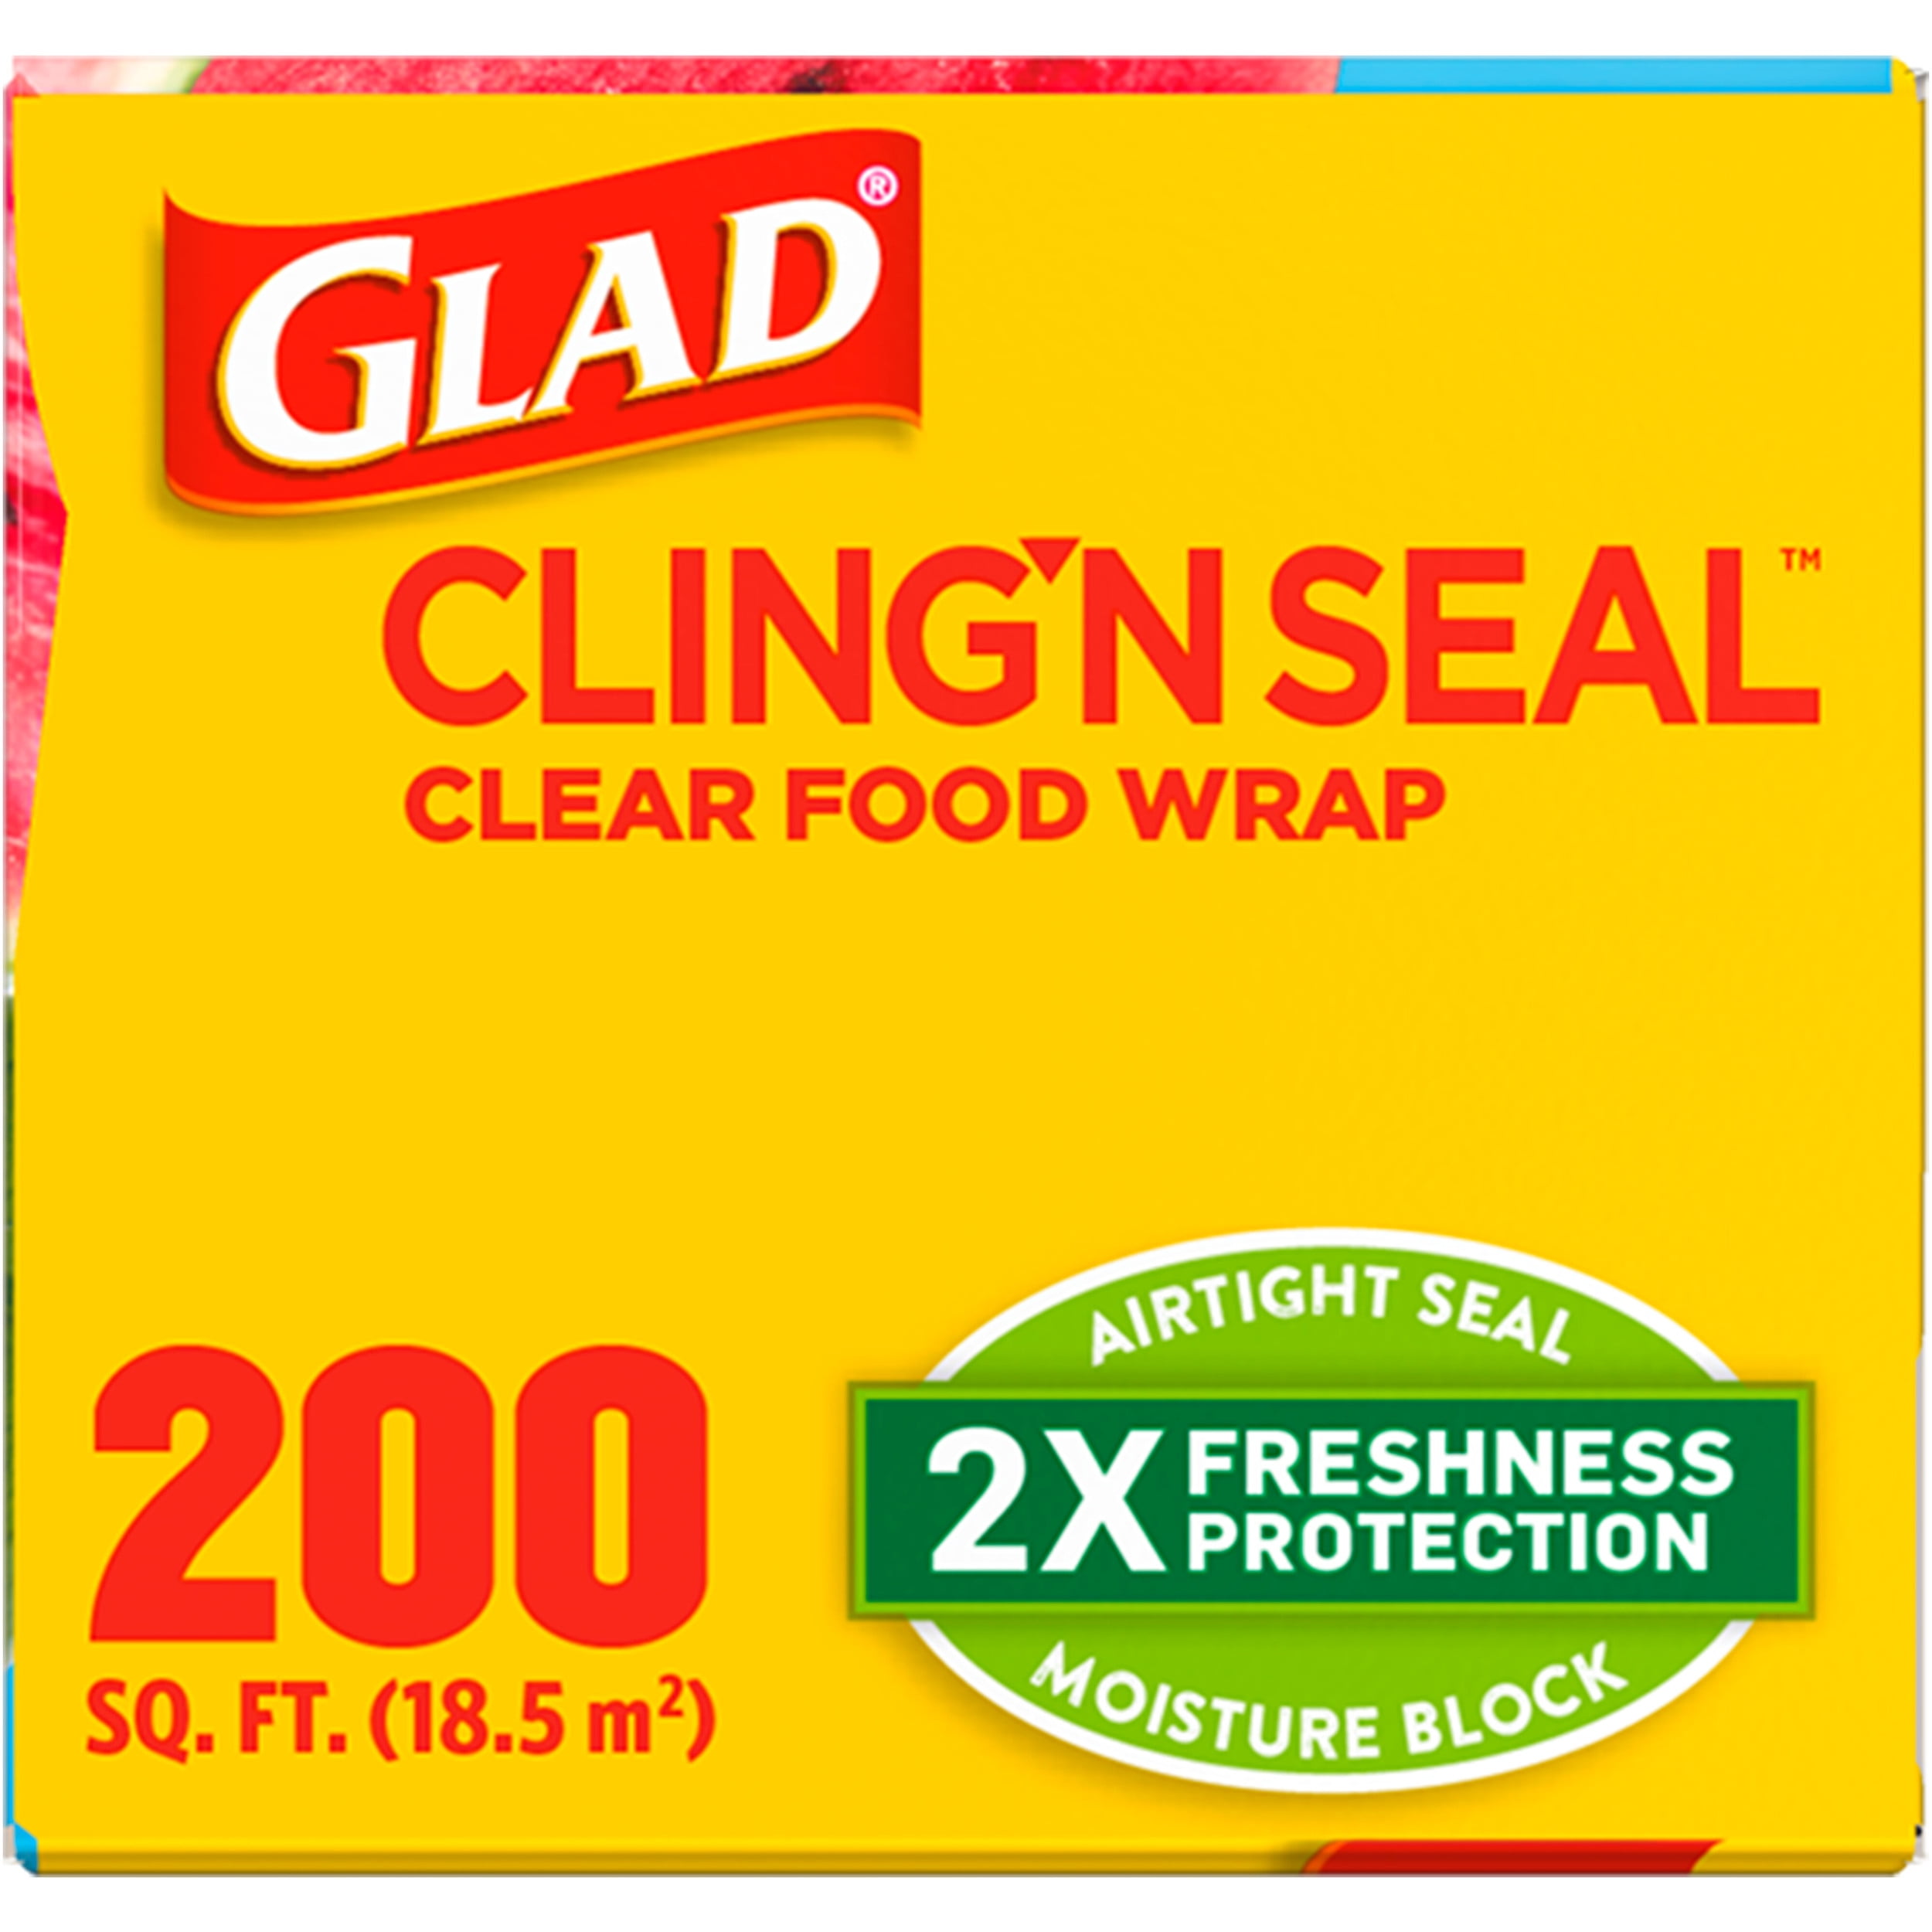 up & up Plastic clings Wrap - 200 sq ft 66 2/3yd x 12